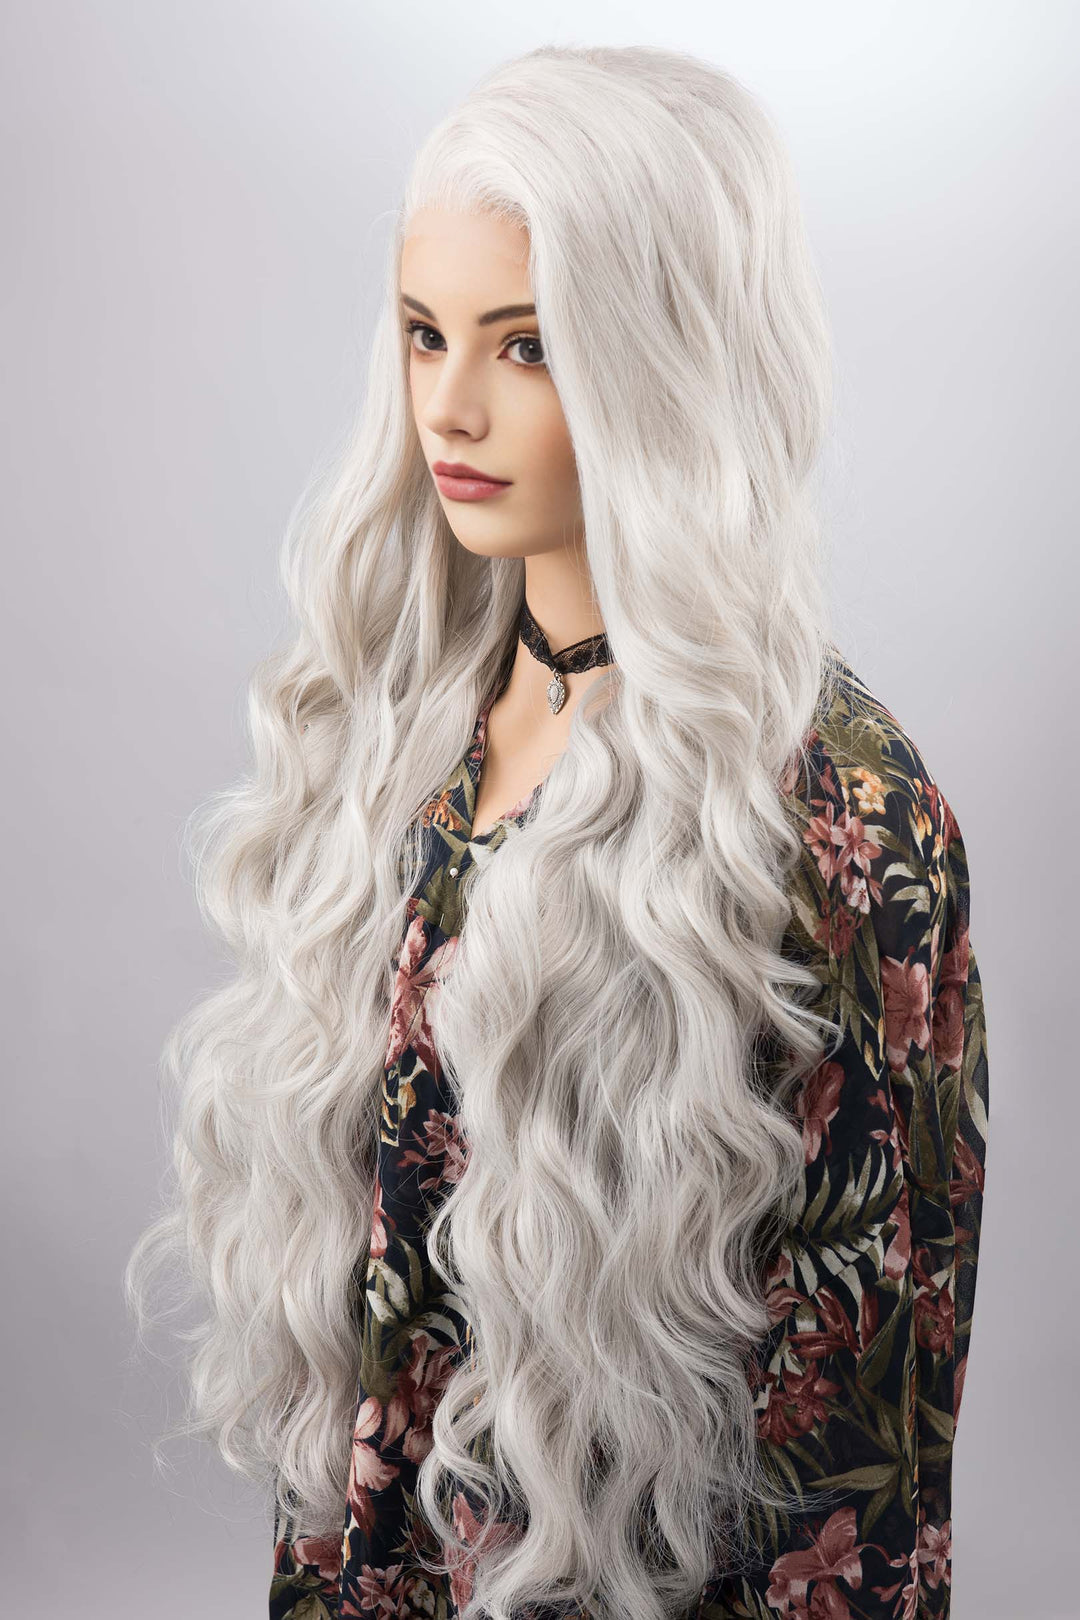 Pearl White Wig Silver Gray Lace Front Wig 13" X 4" Large Base Lace Top Wig Daenerys Lace Wig Rhaenyra Blonde Wig Her Wig Closet Orla